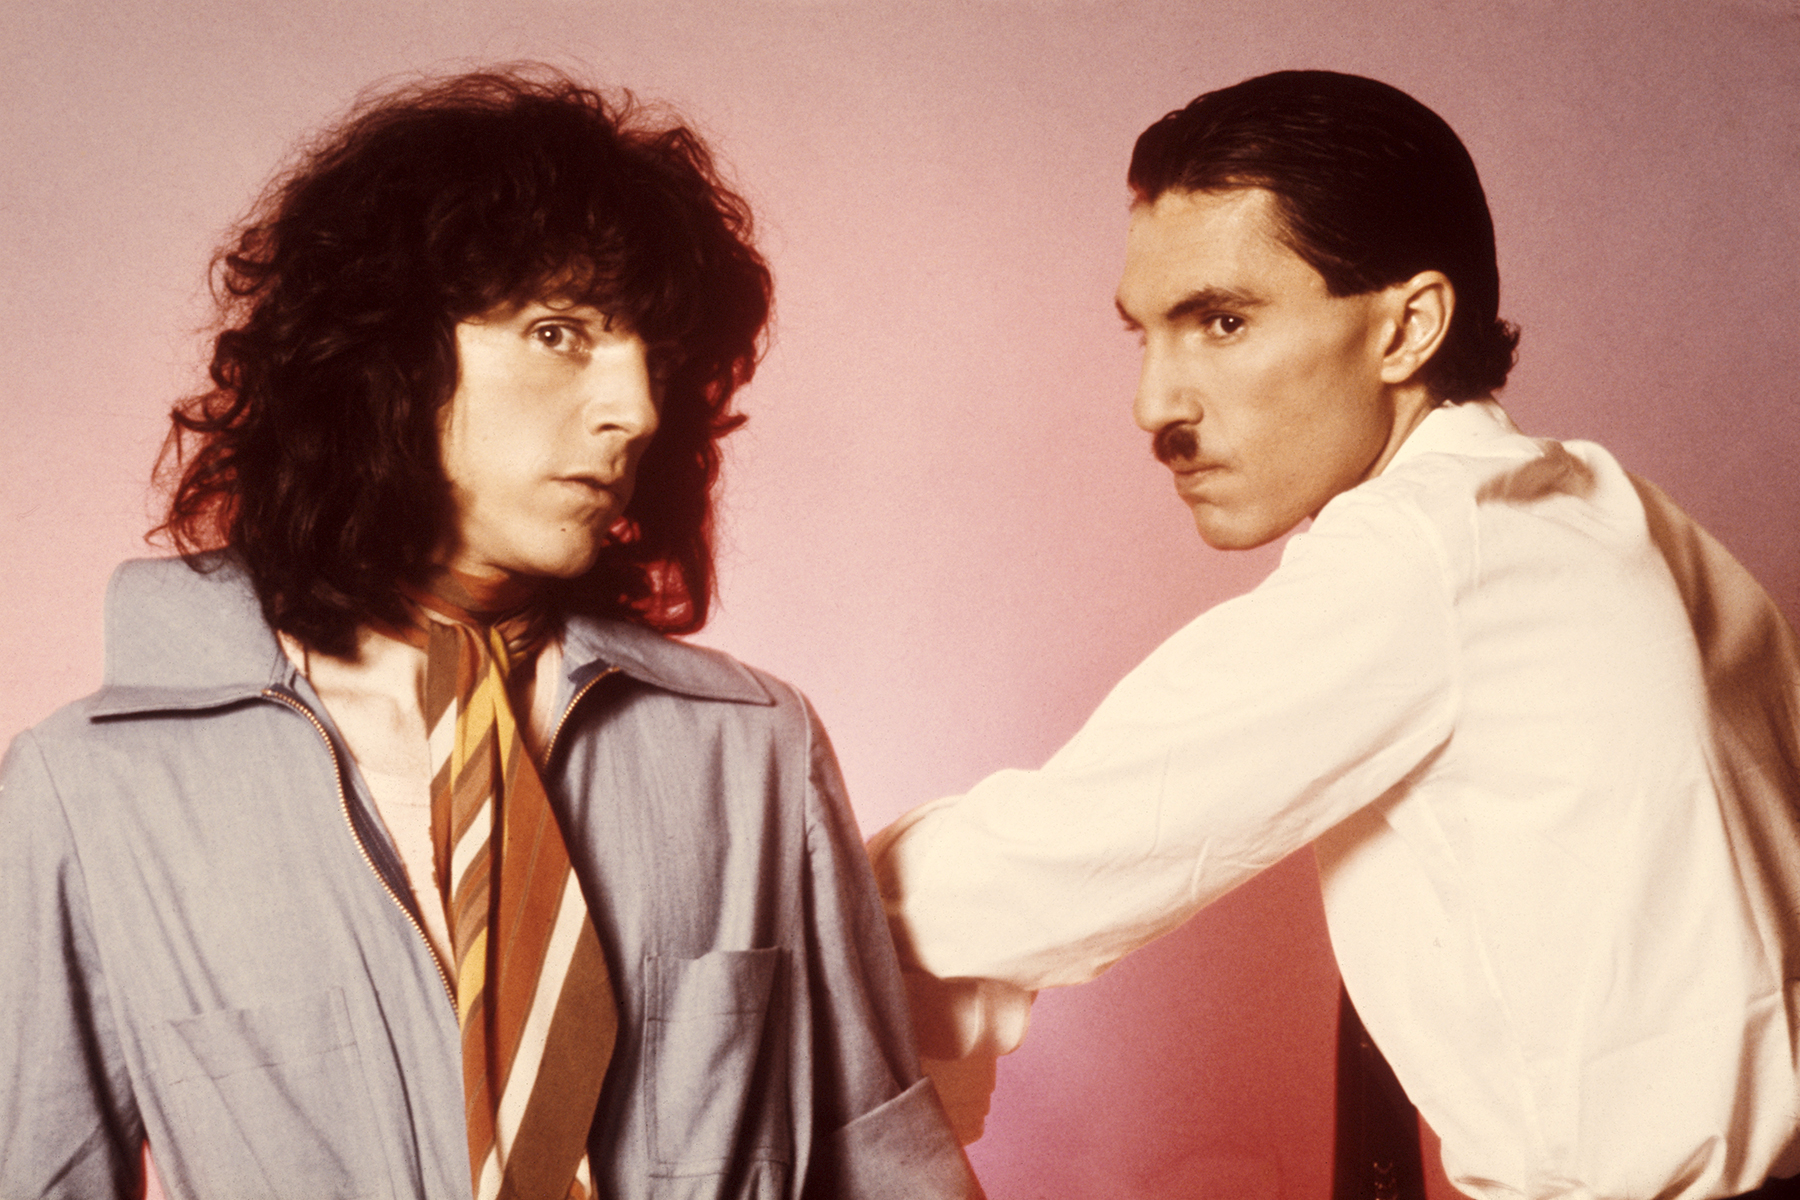 Brothers Ron (right) and Russell Mael of American rock group Sparks, March 1975. (Photo by Michael Putland/Getty Images)